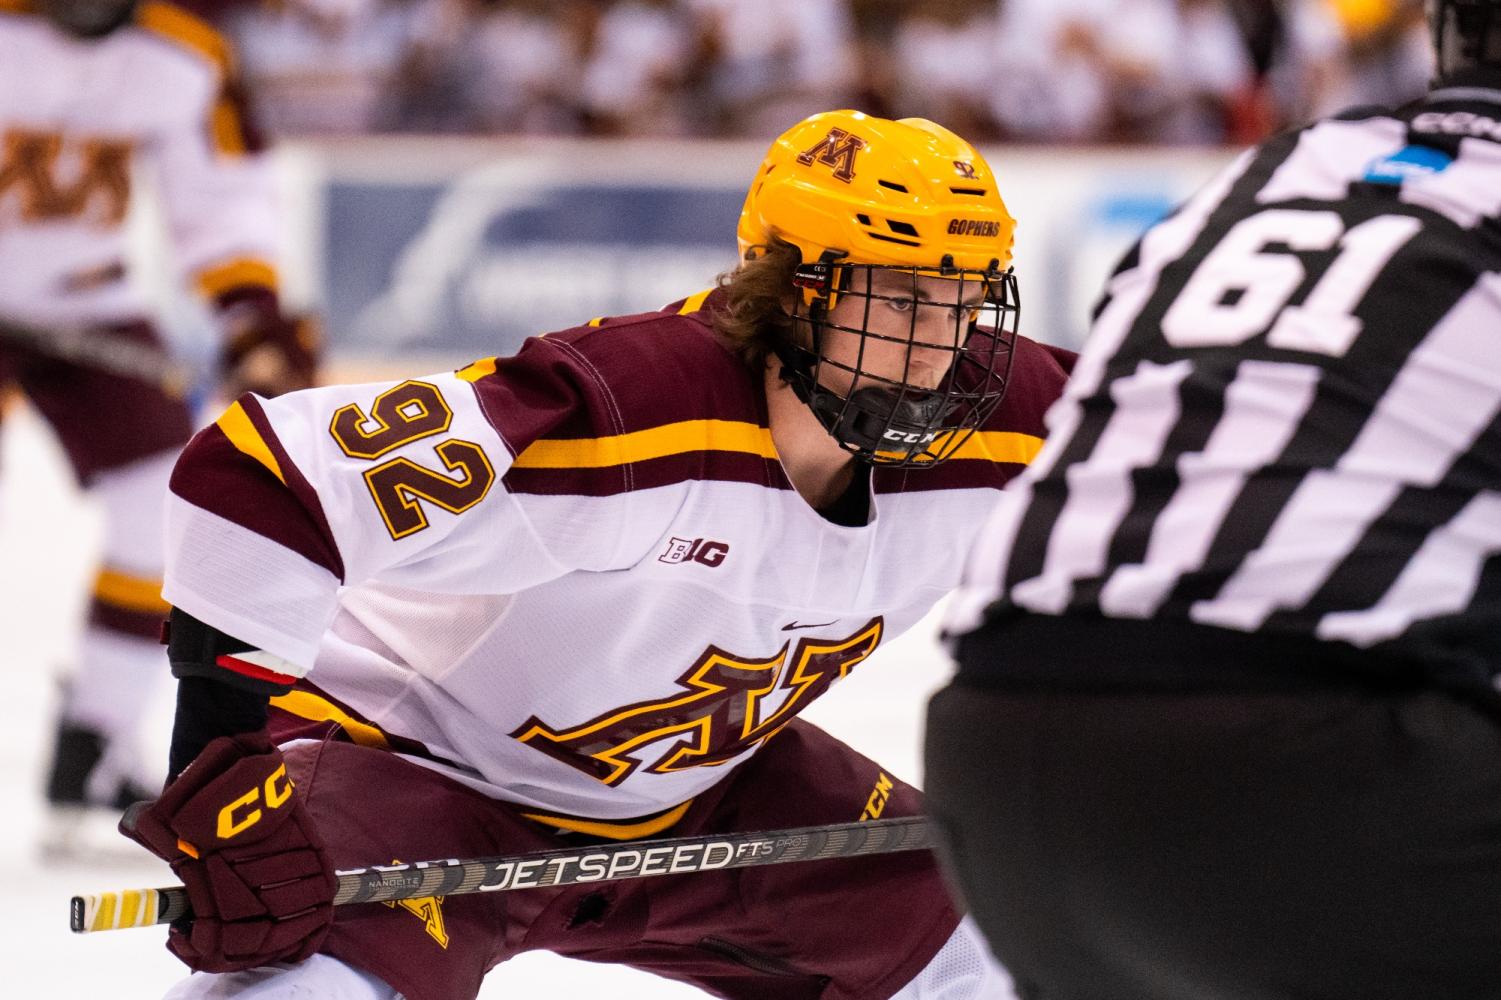 Big Ten hockey has come a long way, as Gophers near conference title